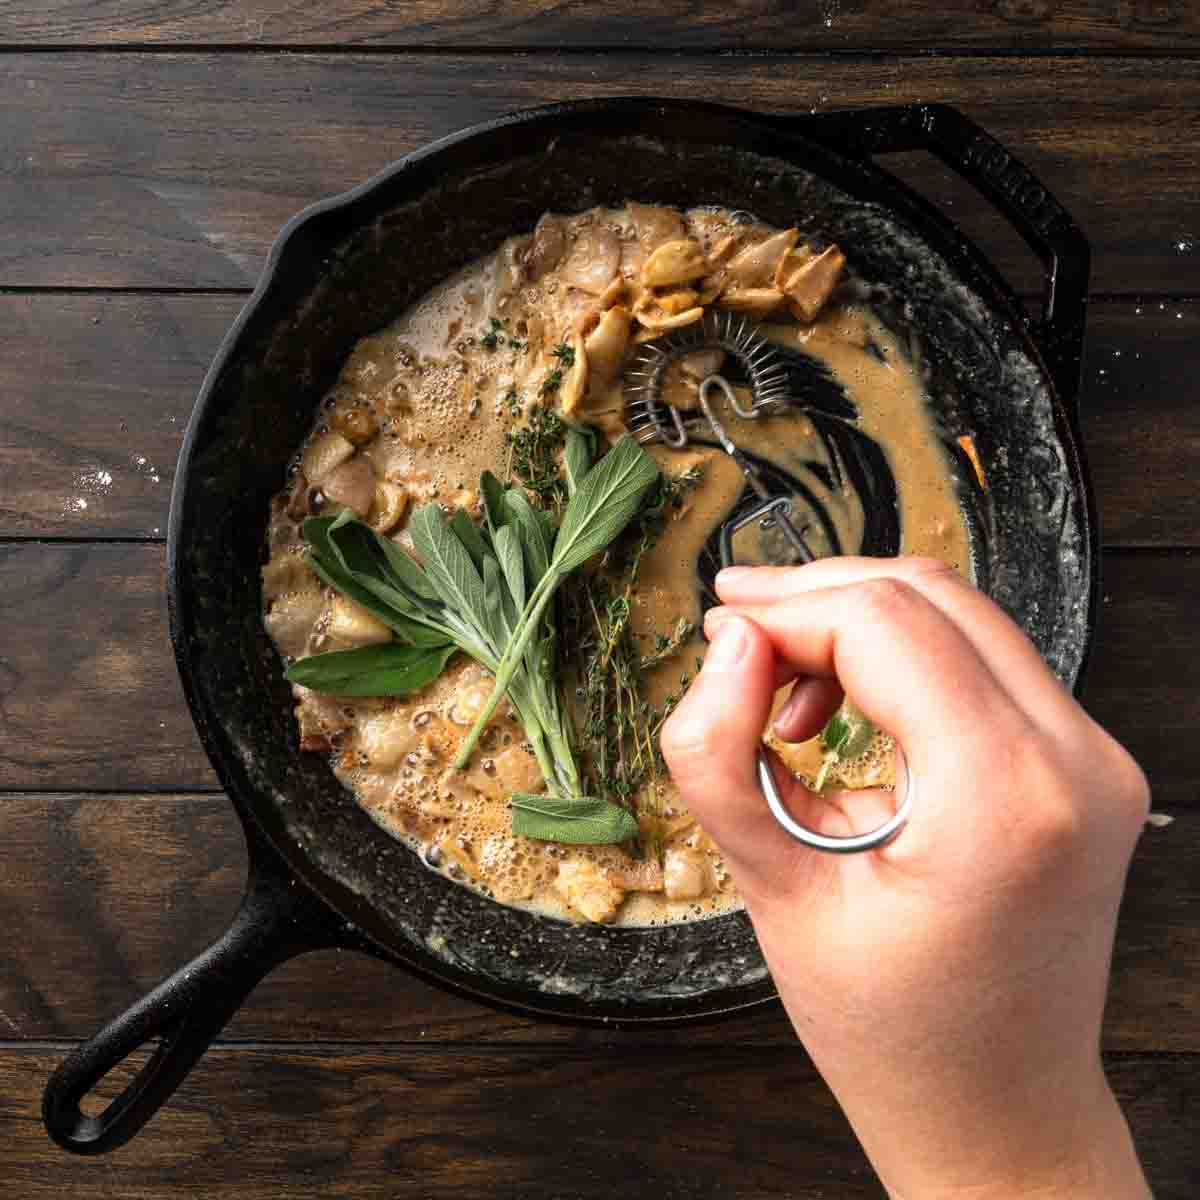 Fresh sage and thyme a top a skillet full of gravy roux. 